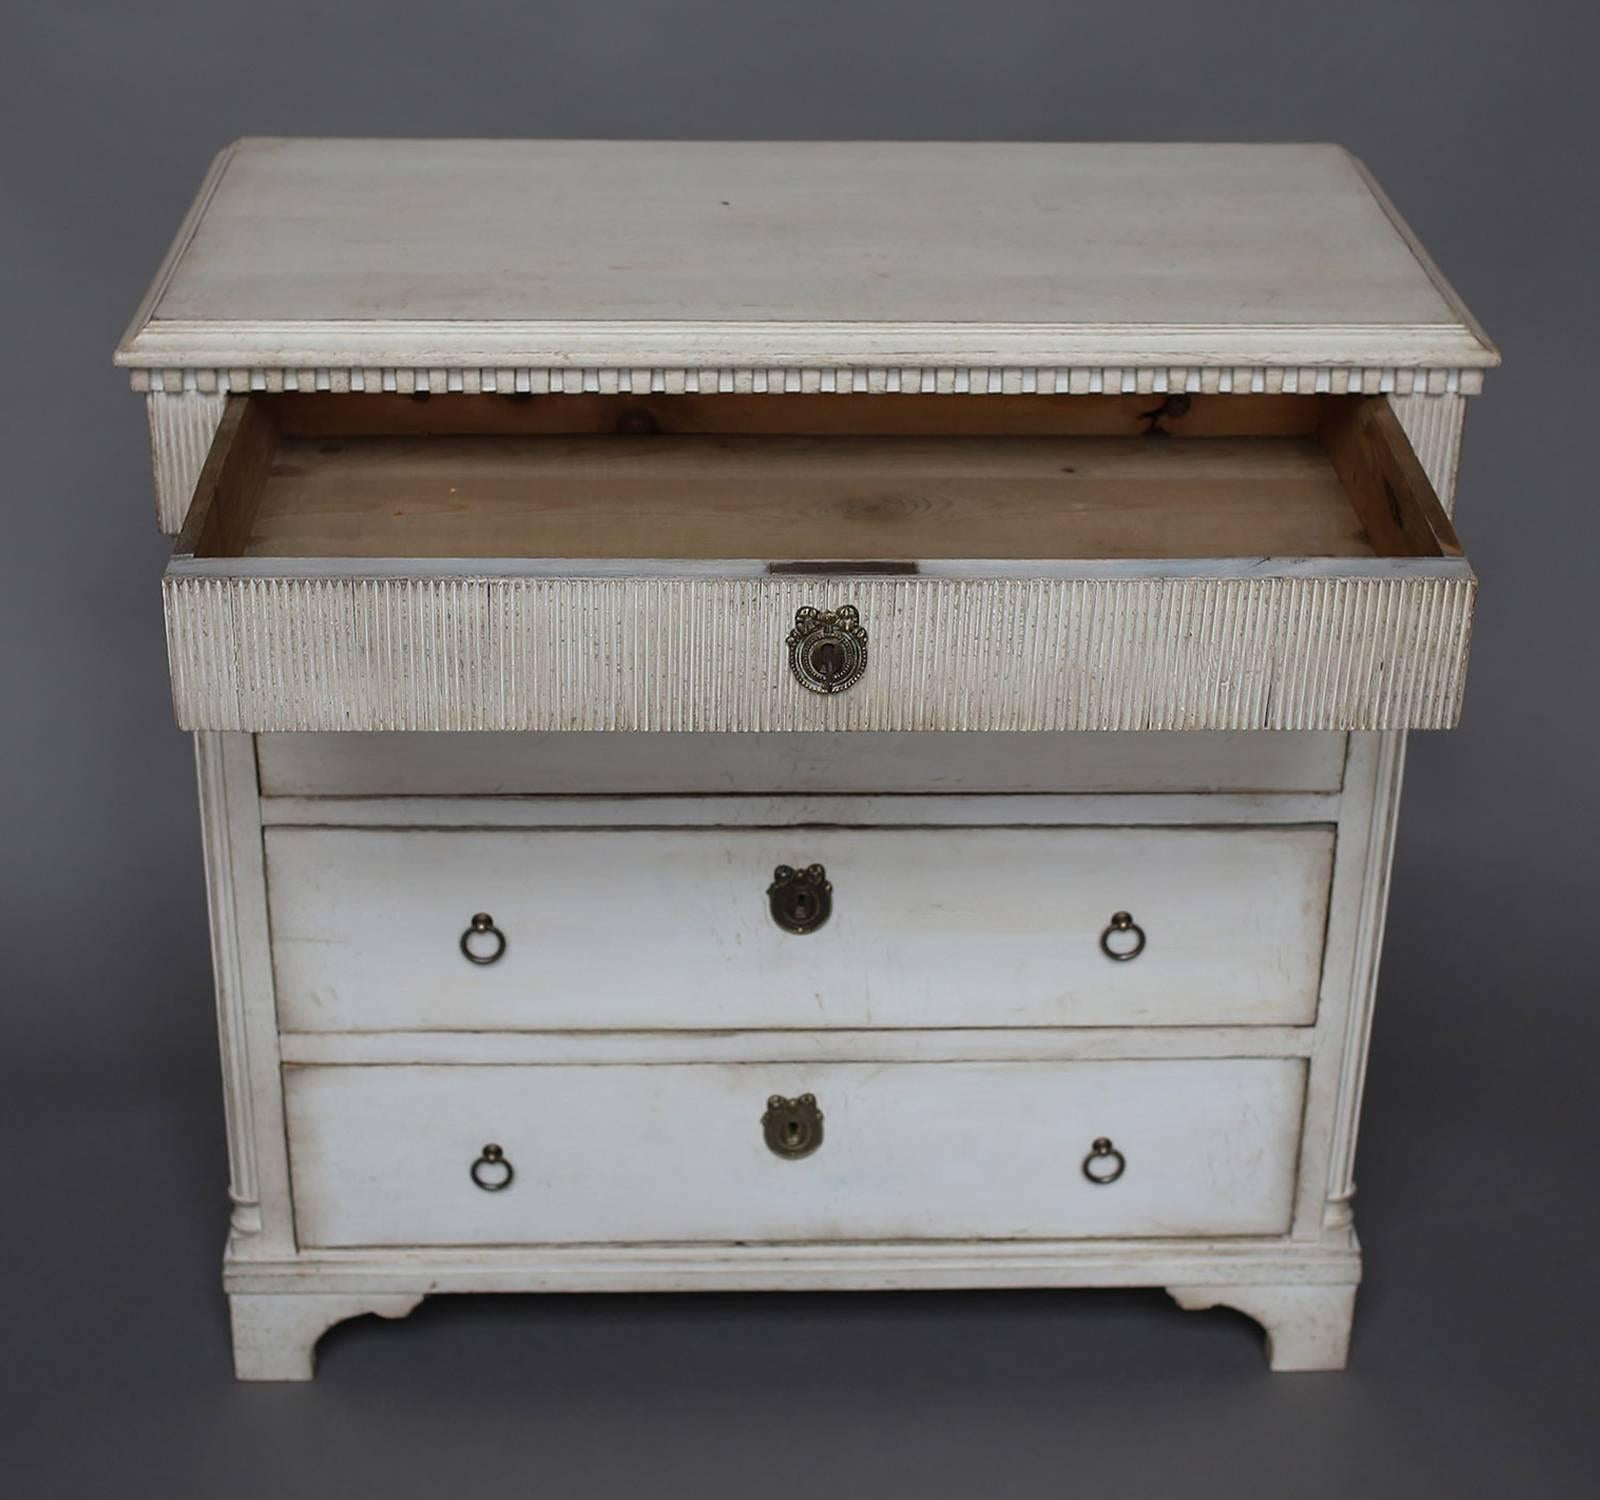 Small Louis XVI style commode, Denmark circa 1860, with four drawers. Dentil molding under the shaped top and reeding around the top drawer on three sides. Reeded quarter columns with turned detail at the front corners. Shaped bracket base.